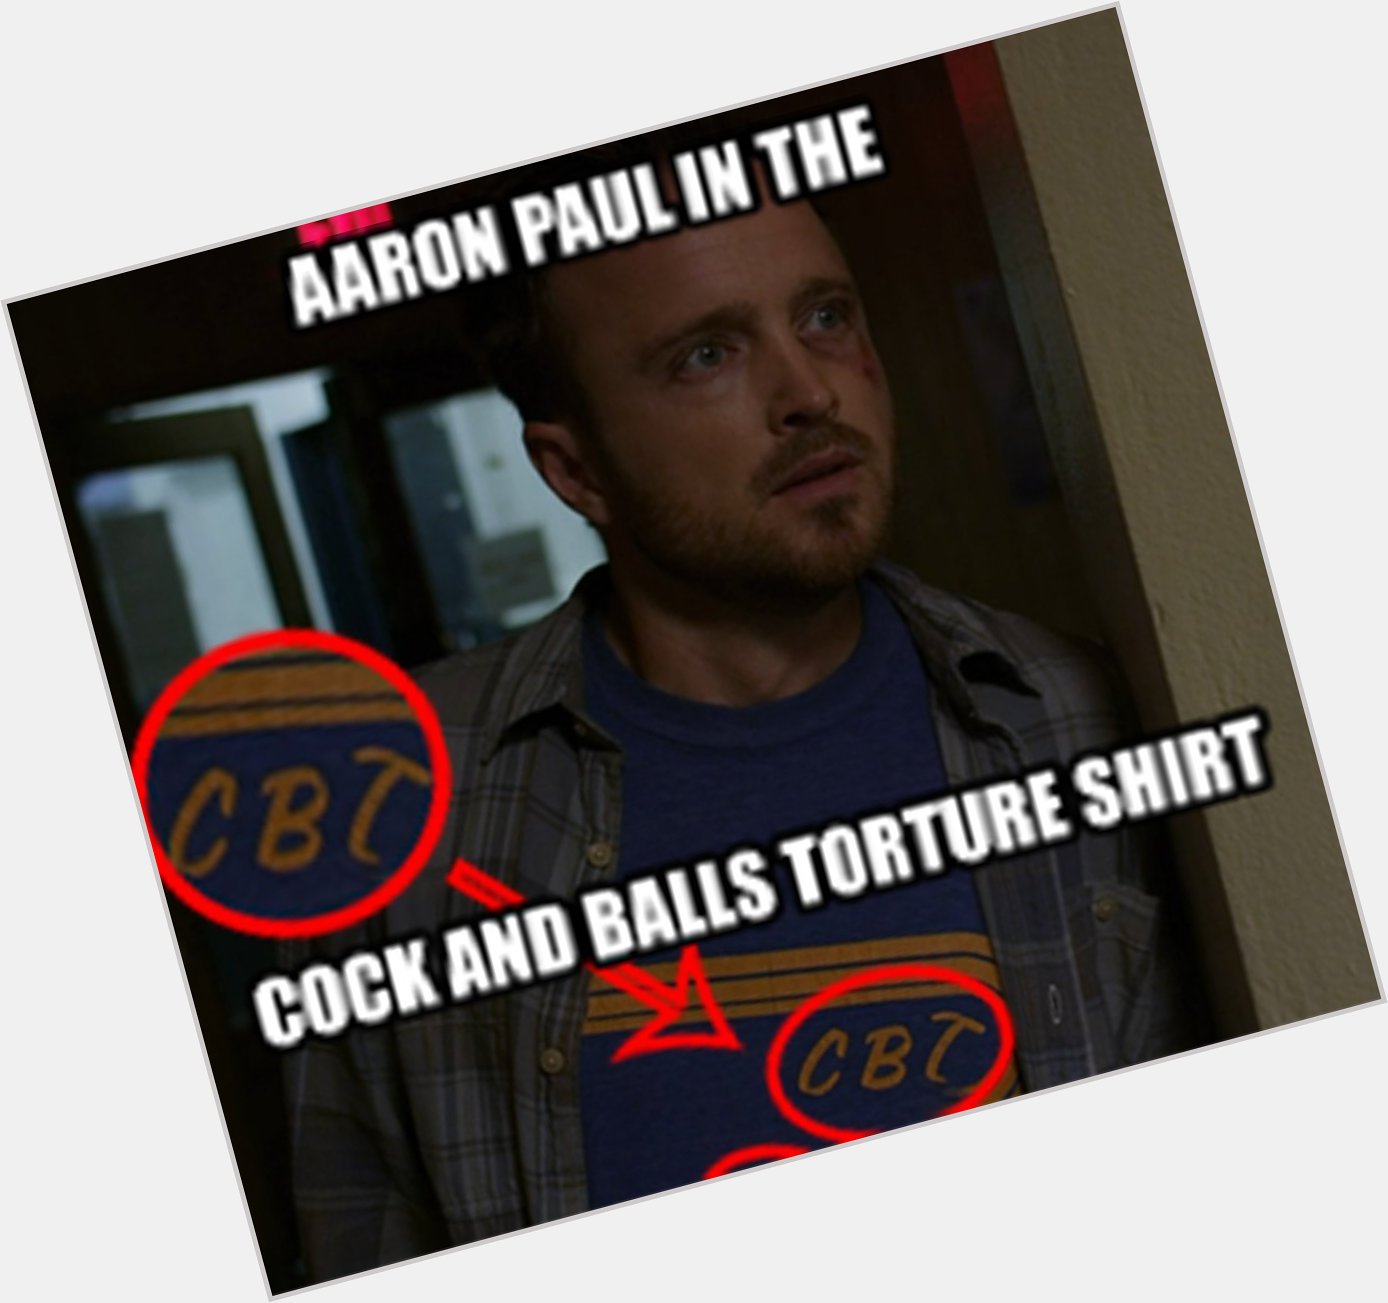 HAPPY BIRTHDAY TO AARON PAUL!!!! One of the best actors of our time 